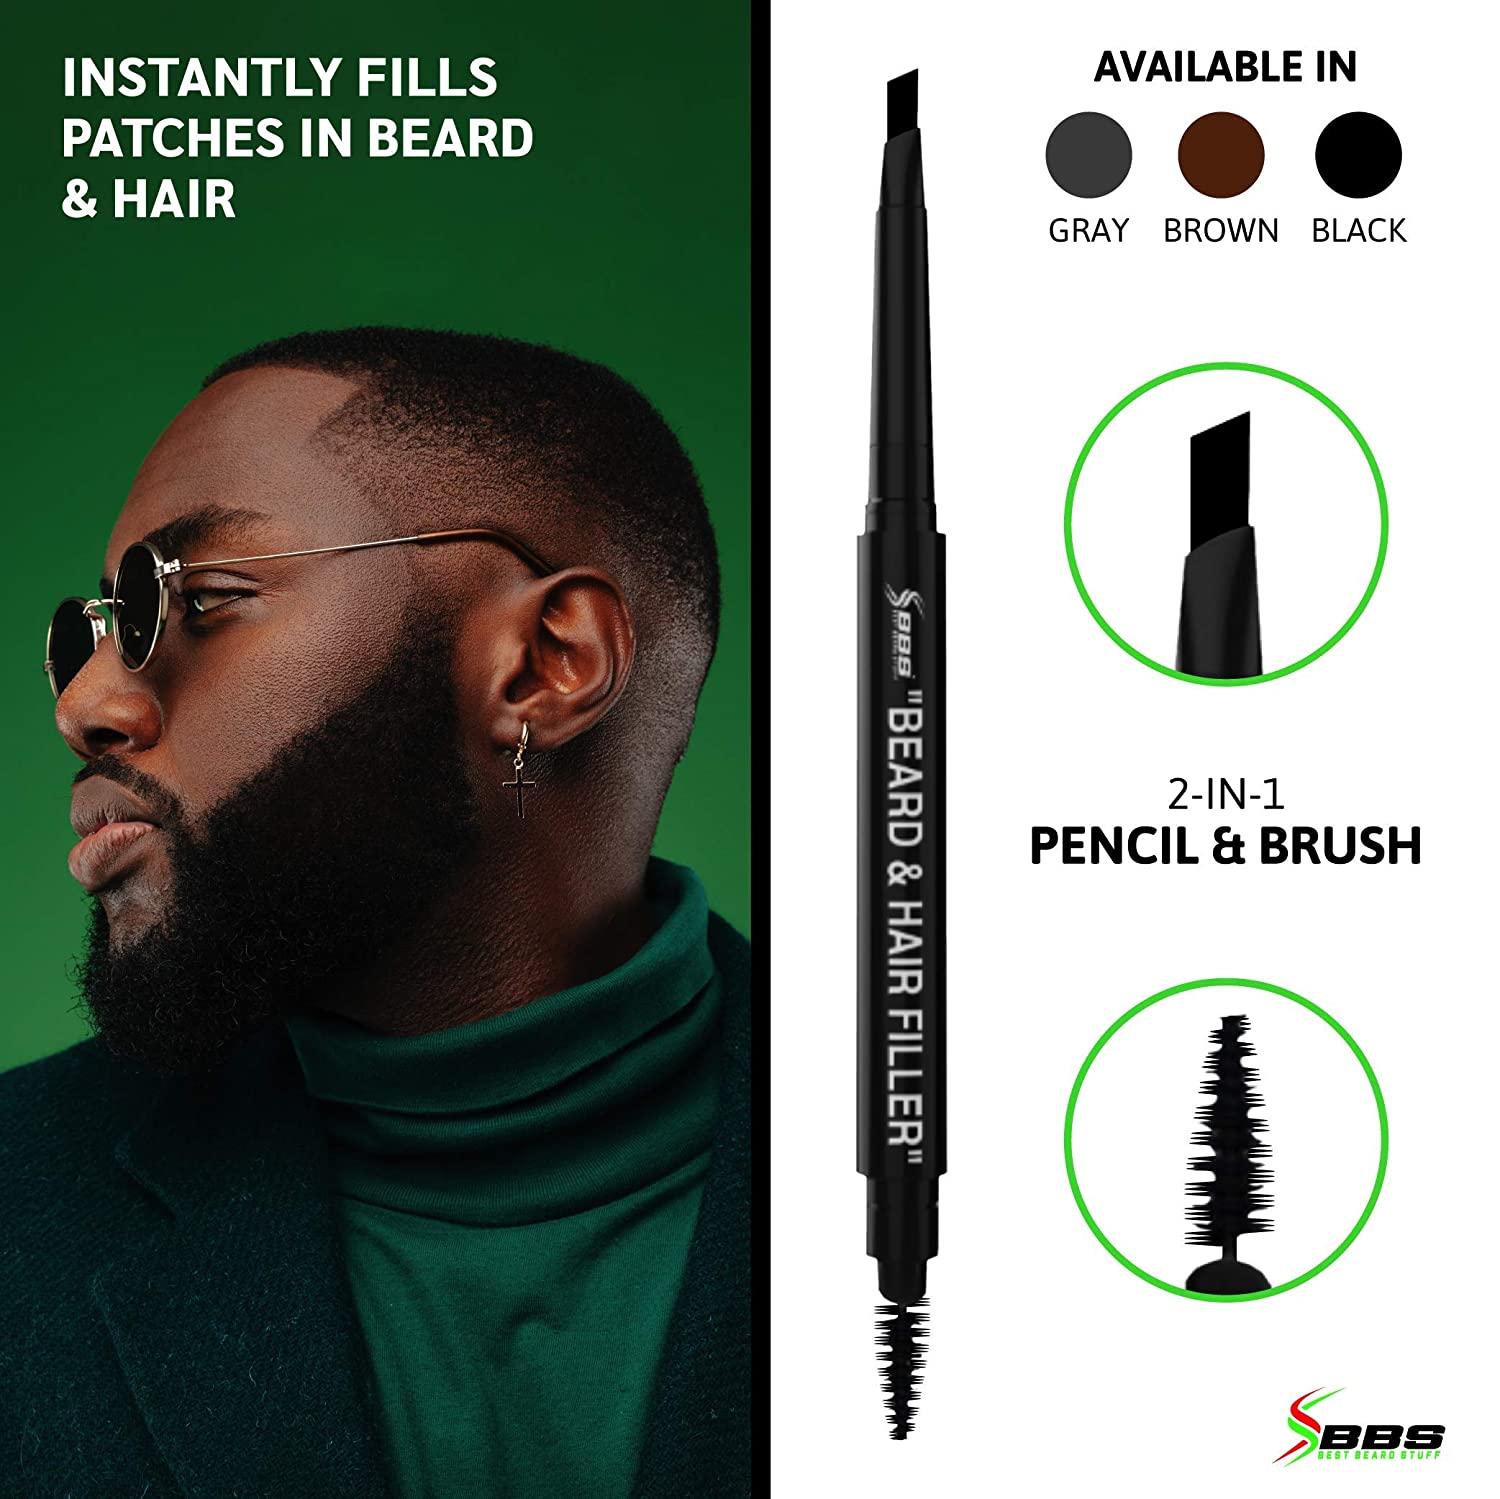 BEST Beard Filler Pen for Men / Pencil & Brush - Fill Patchy & Thin Areas  for a Perfect Beard, Hairline & Mustache - More Effective Than Hair Fiber -  Waterproof -